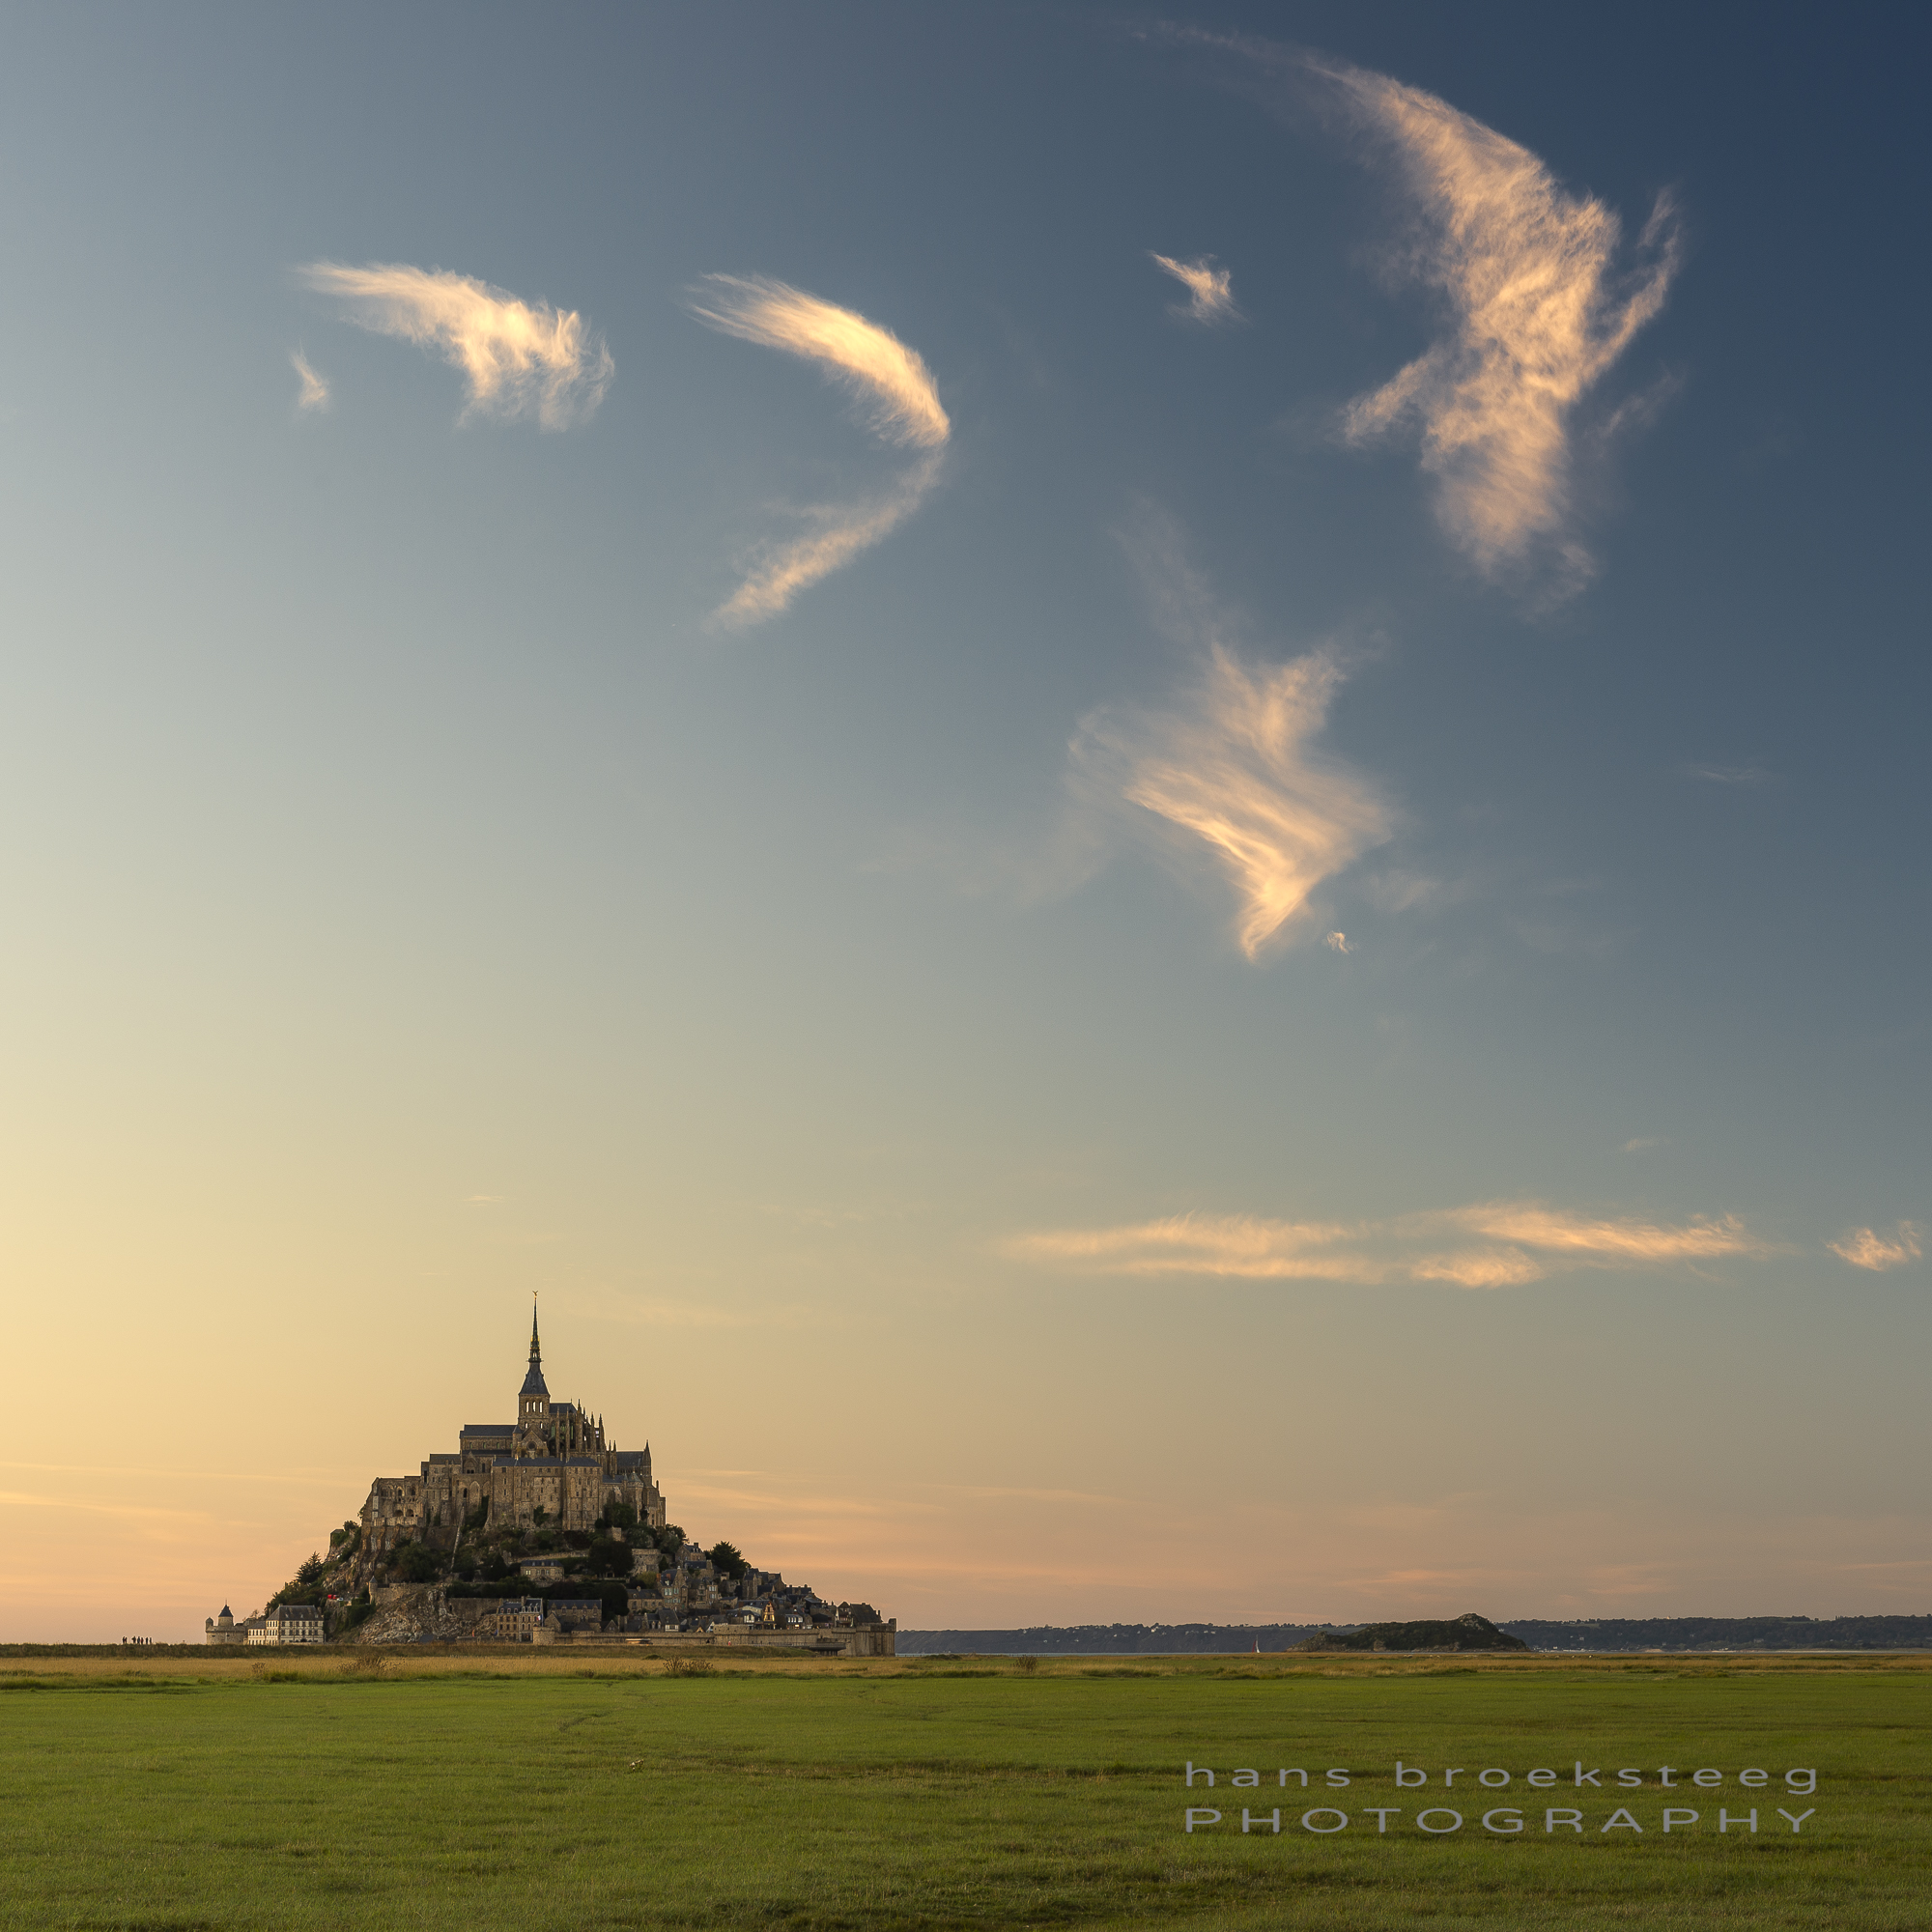 Dancing clouds in the sky above Le Mont Saint Michel